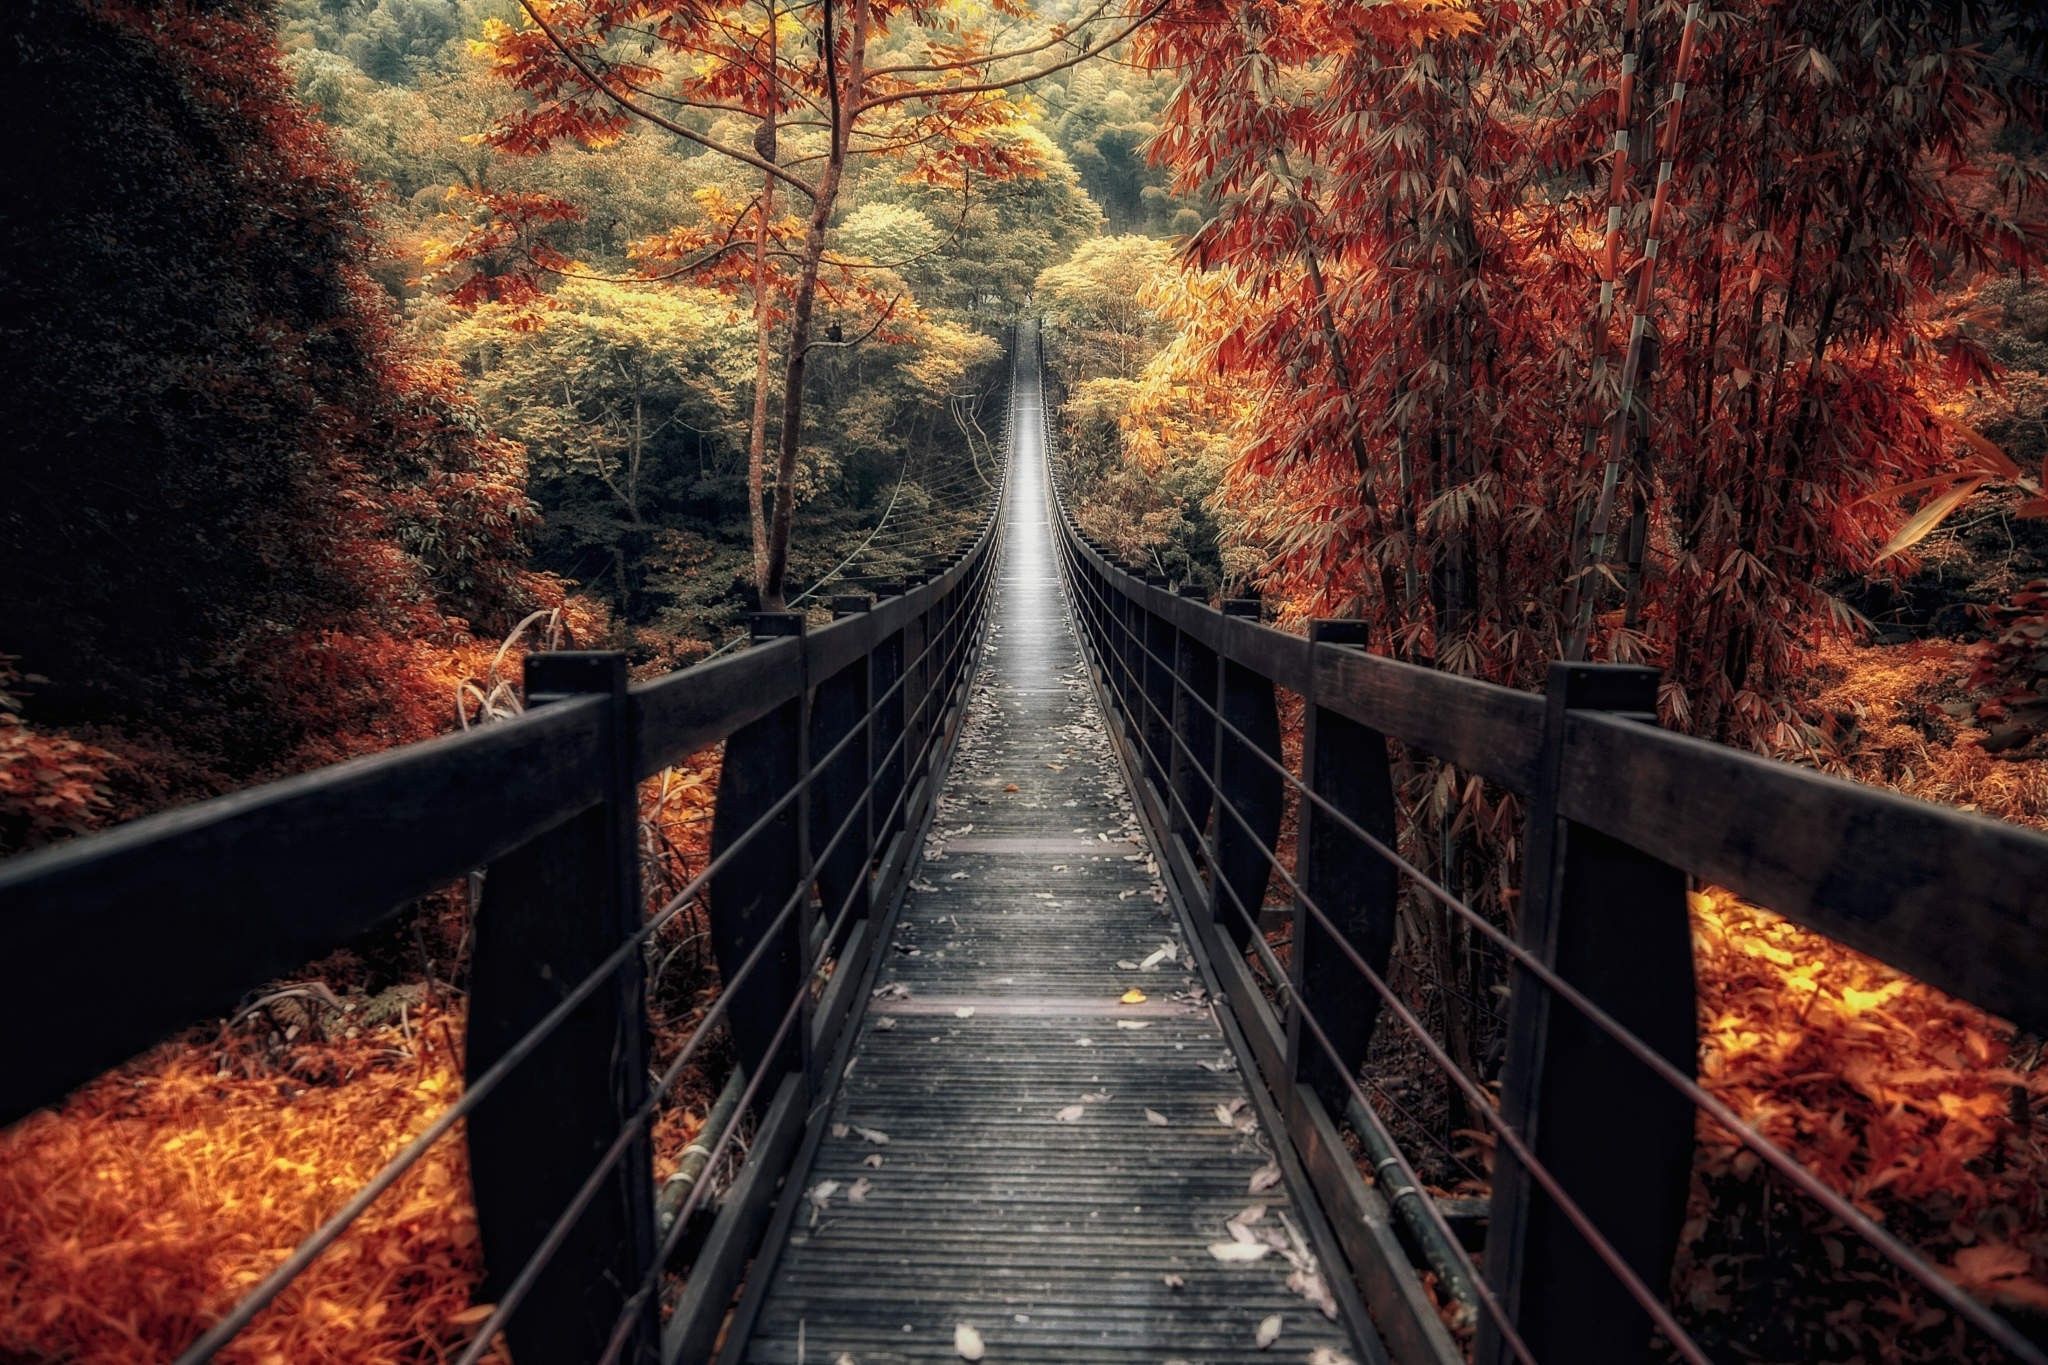 Wallpaper, 2048x1365 px, bamboo, bridge, fall, forest, landscape, nature, path, shrubs, trees, walkway, wooden surface 2048x1365